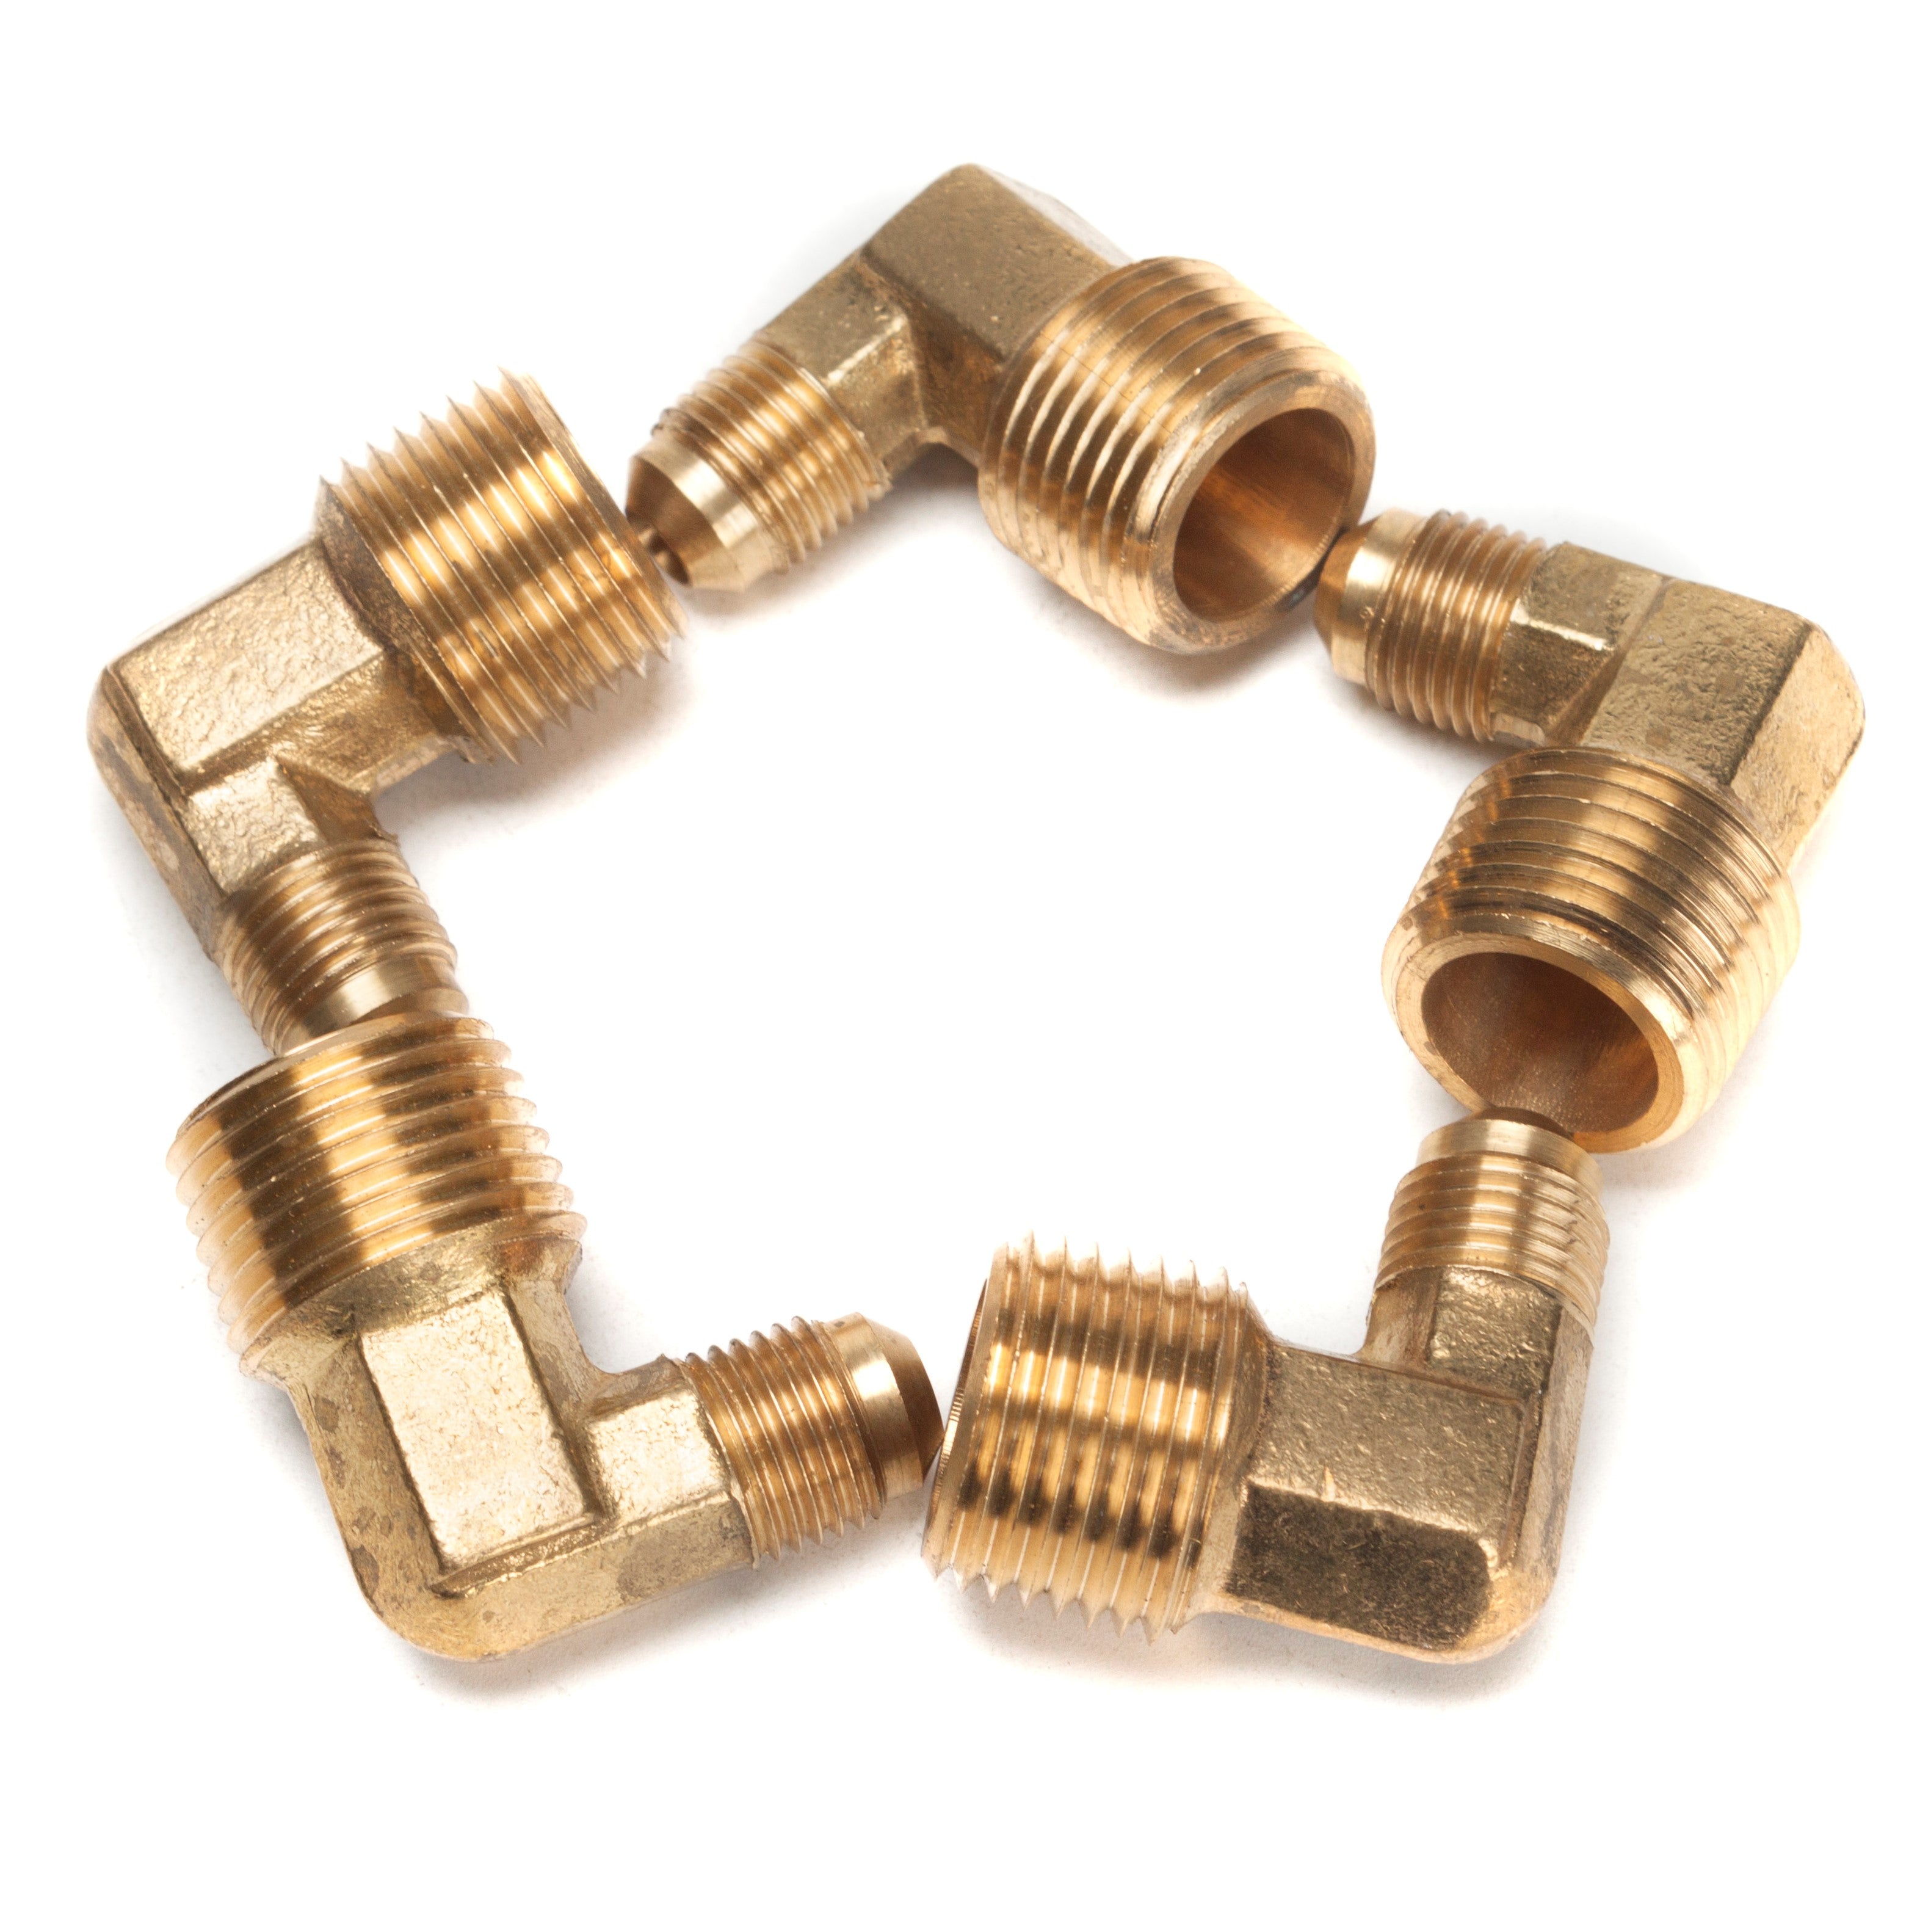 LTWFITTING Brass Flare 5/16 Inch OD x 1/2 InchMale NPT 90 Degree Elbow Tube Fitting (Pack of 5)